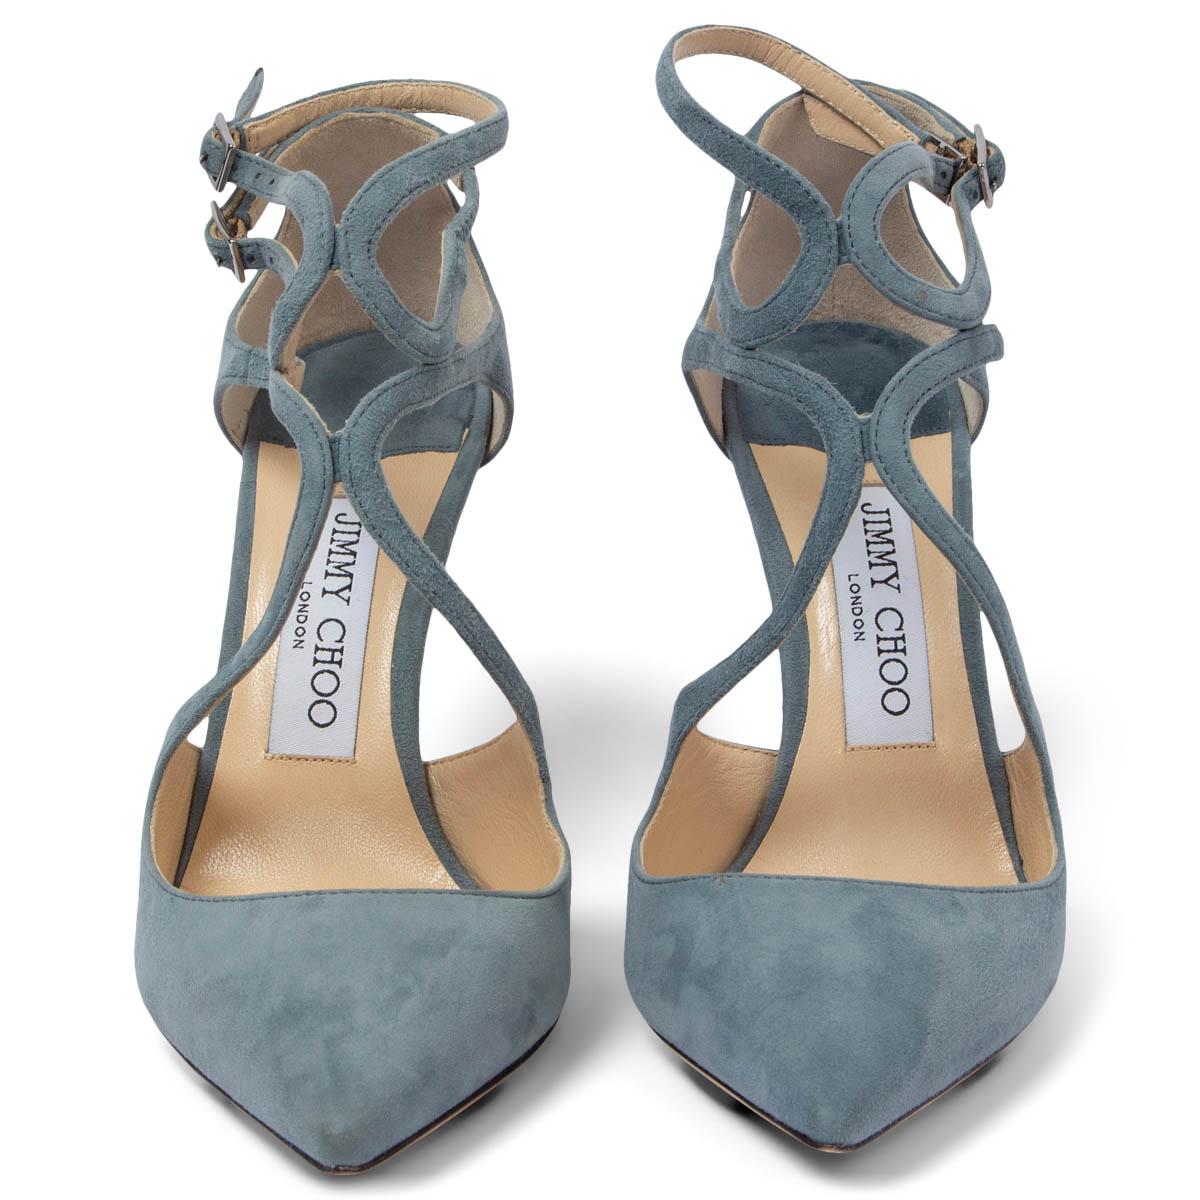 100% authentic Jimmy Choo Lancer 100 pointed-toe strappy pumps in dusk blue suede. Close with two buckles on the side. Have been worn once and are in excellent condition.

Measurements
Imprinted Size	36
Shoe Size	36
Inside Sole	23cm (9in)
Width	7cm